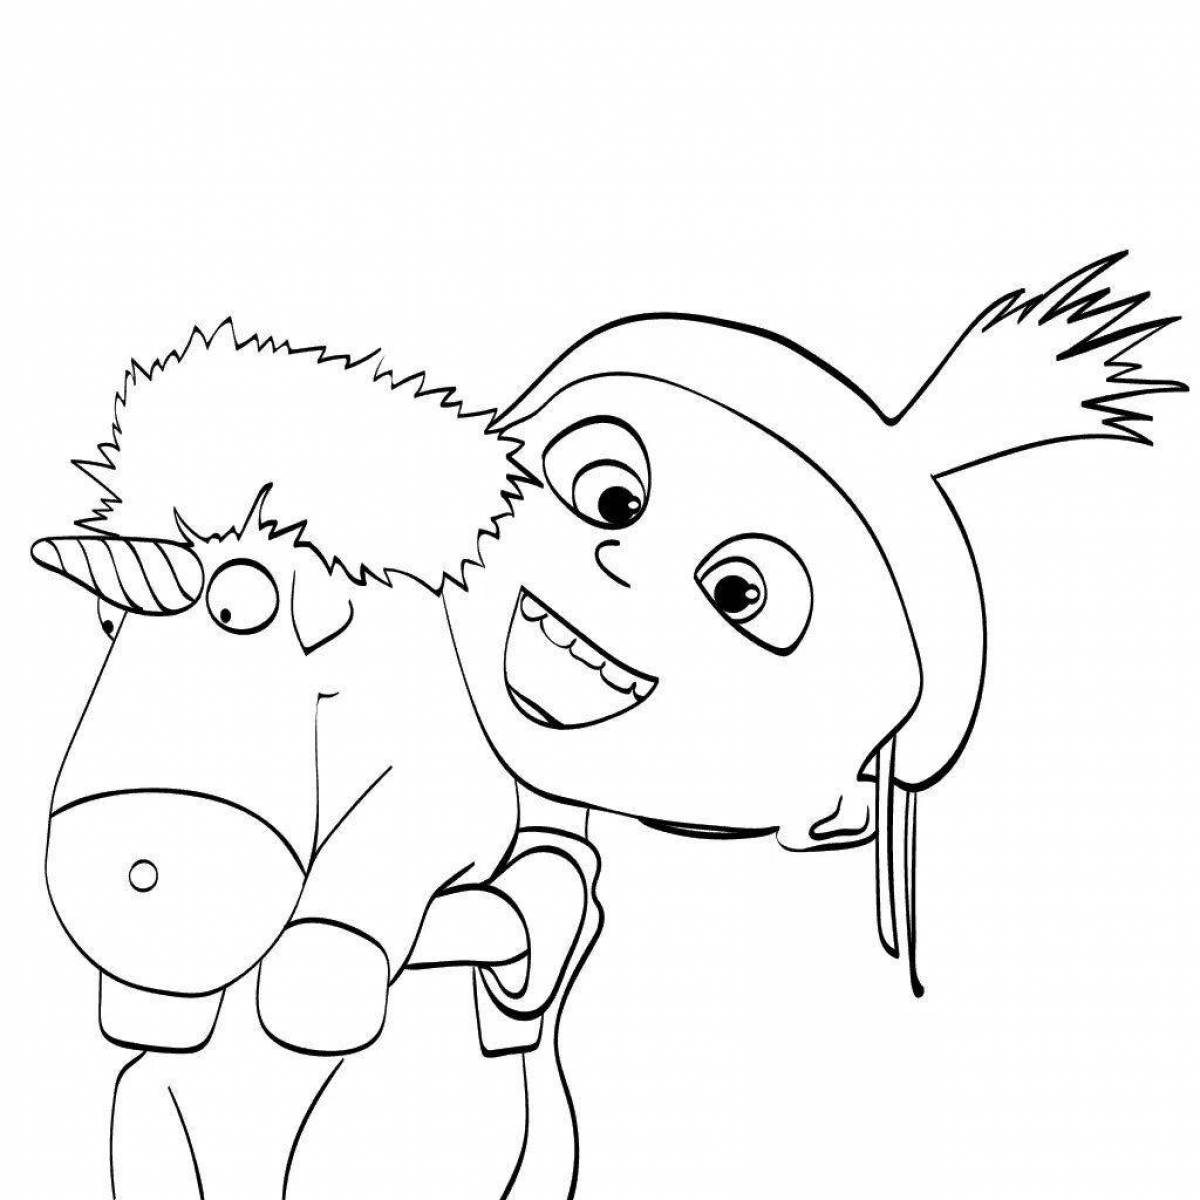 Agnes charming coloring book